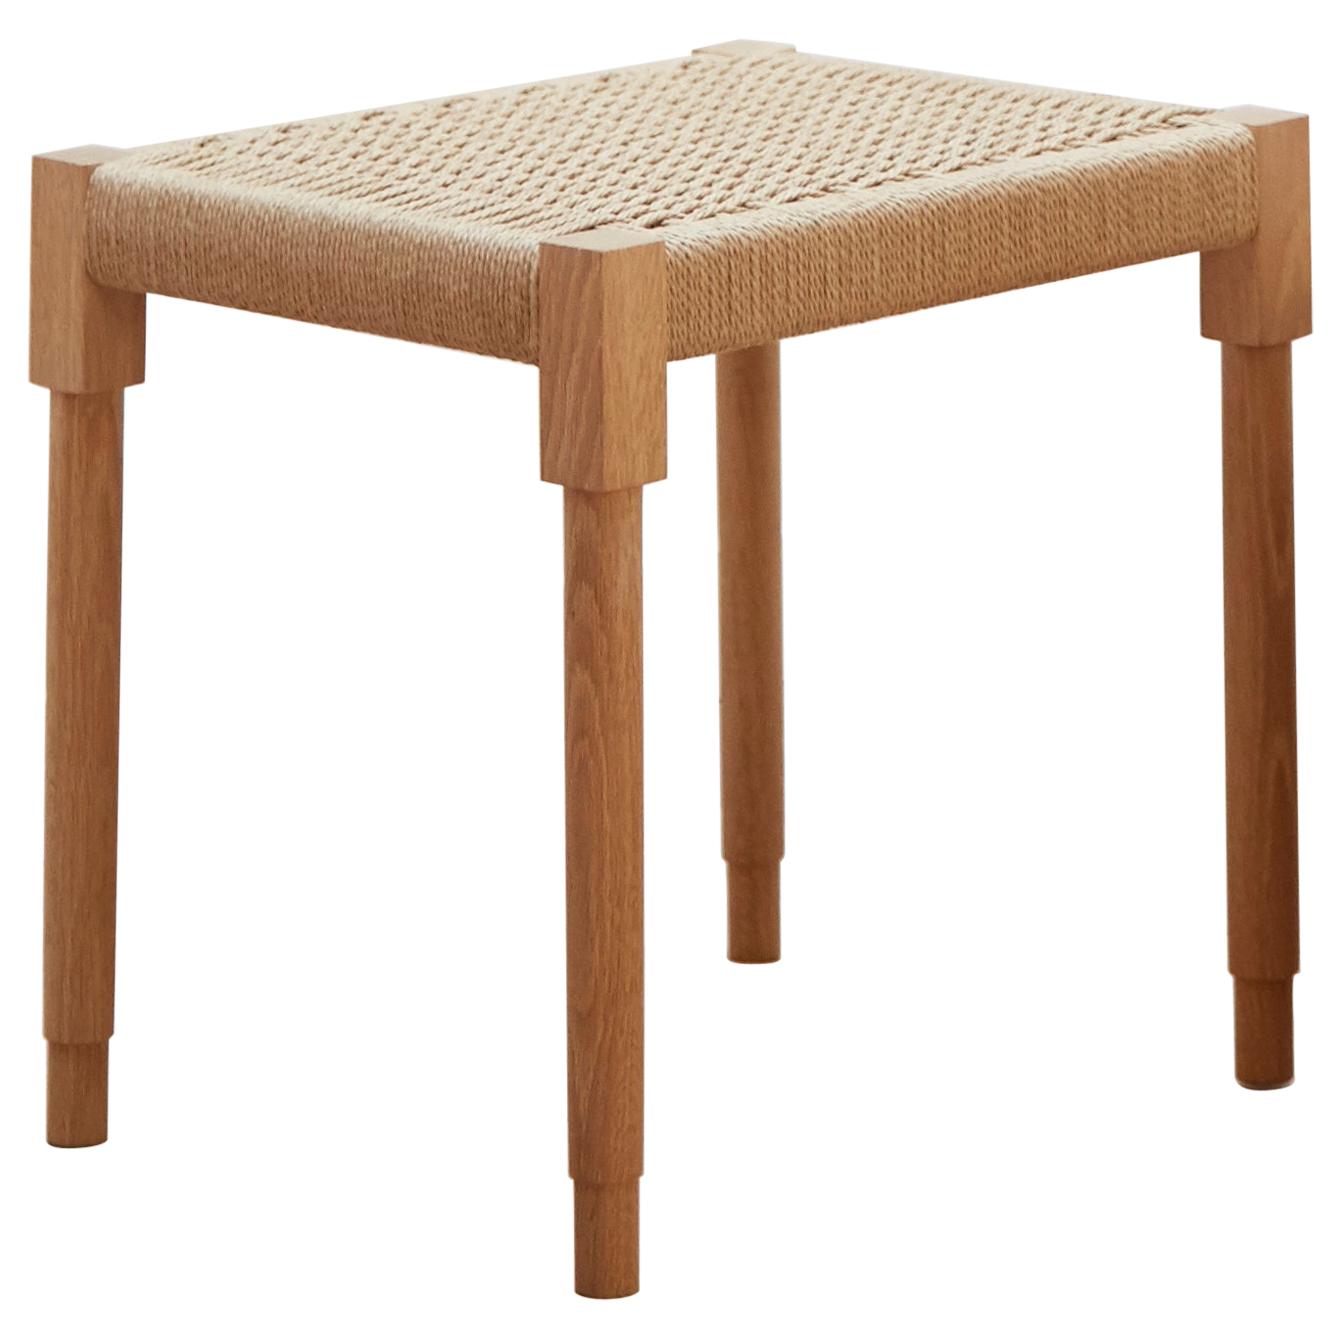 Rectangular Field Stool in White Oak with Danish Cord For Sale